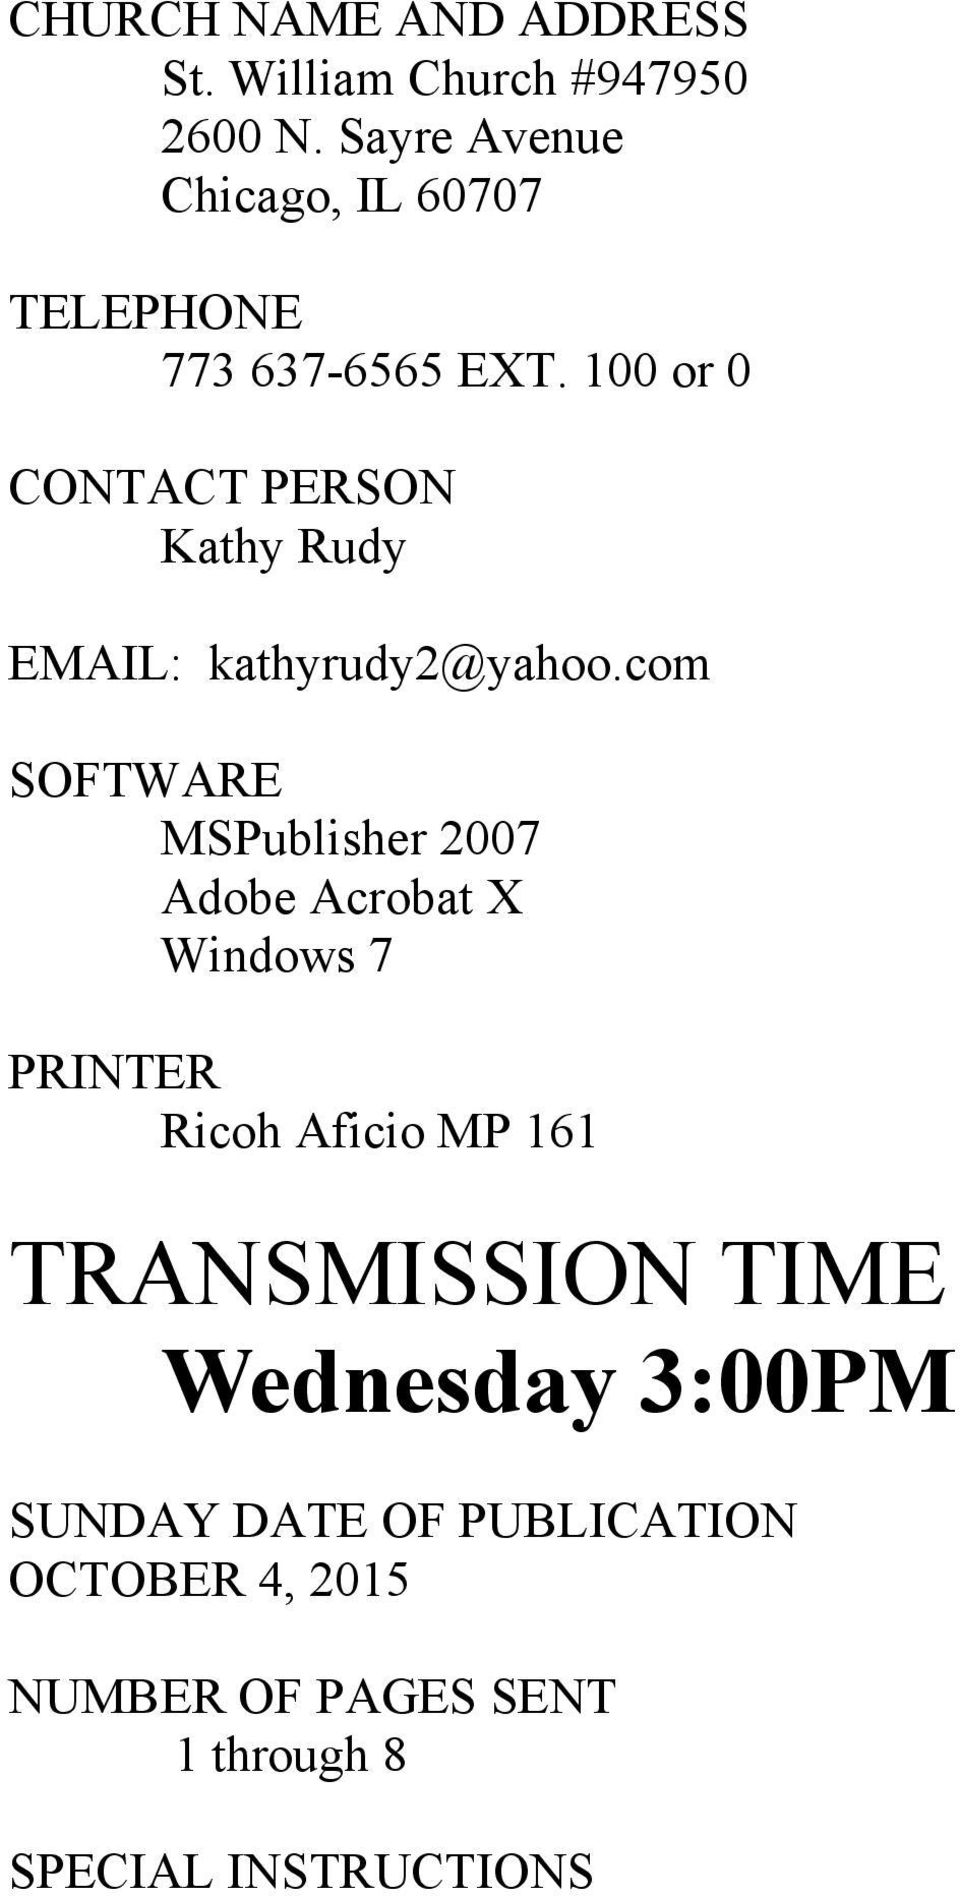 100 or 0 CONTACT PERSON Kathy Rudy EMAIL: kathyrudy2@yahoo.